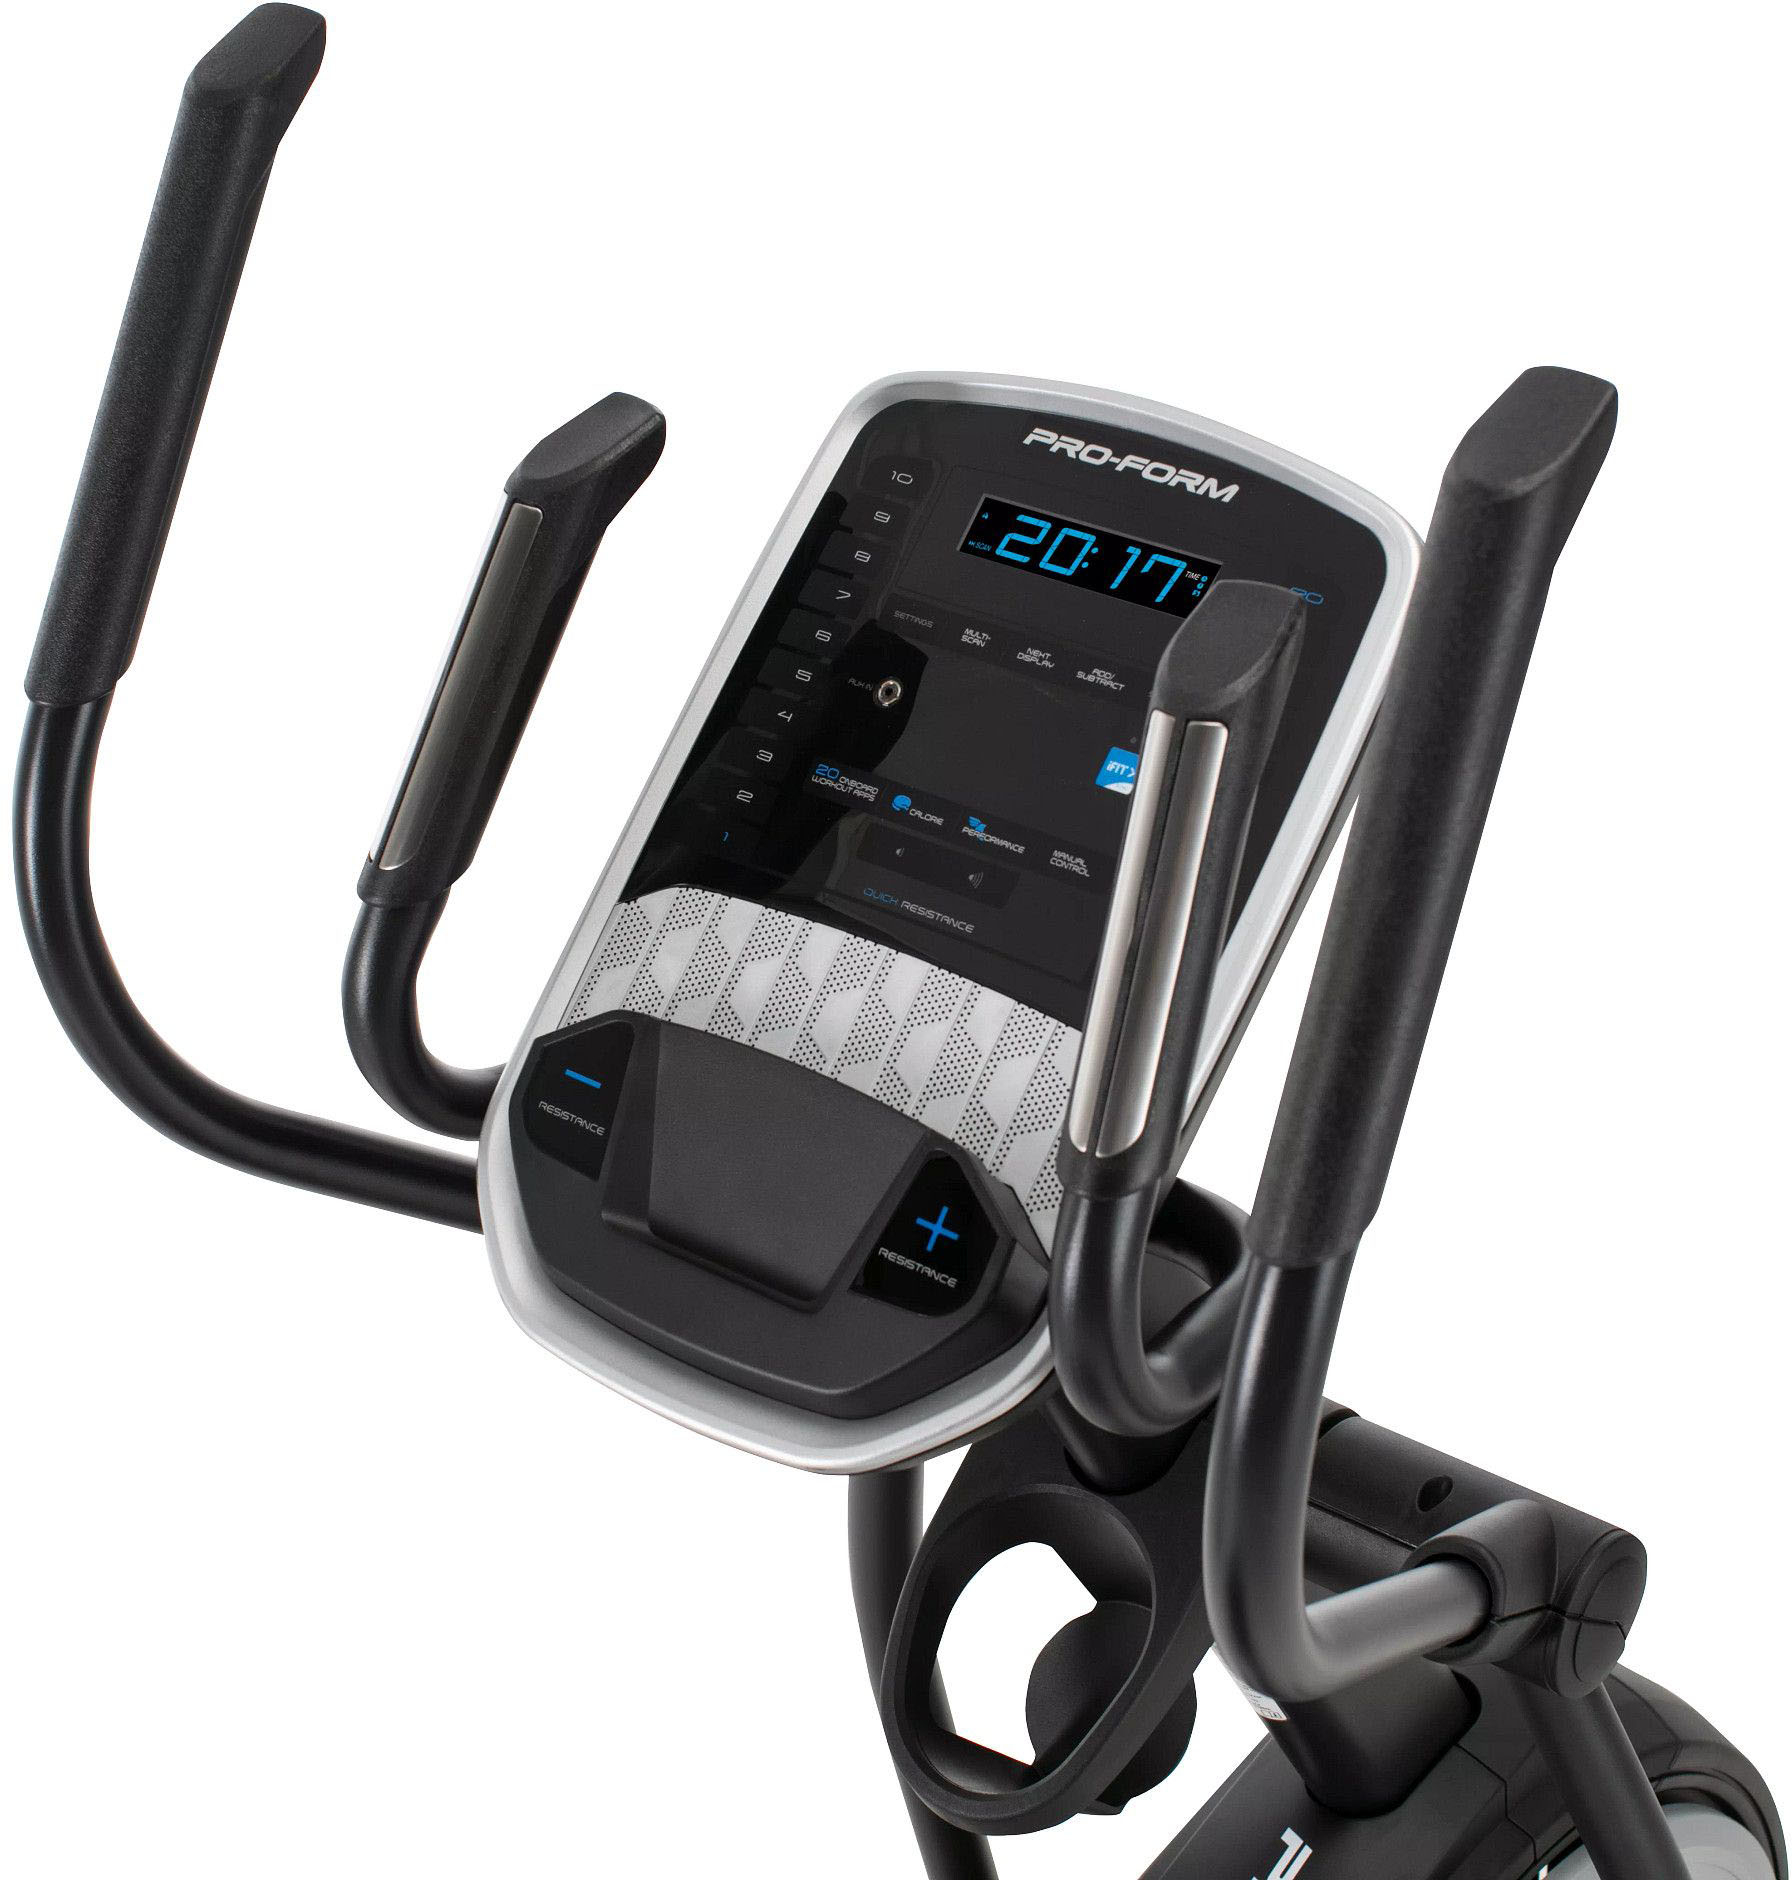 Angle View: ProForm Carbon EL Front Drive Elliptical with 19” Adjustable Stride, iFit Bluetooth Enabled